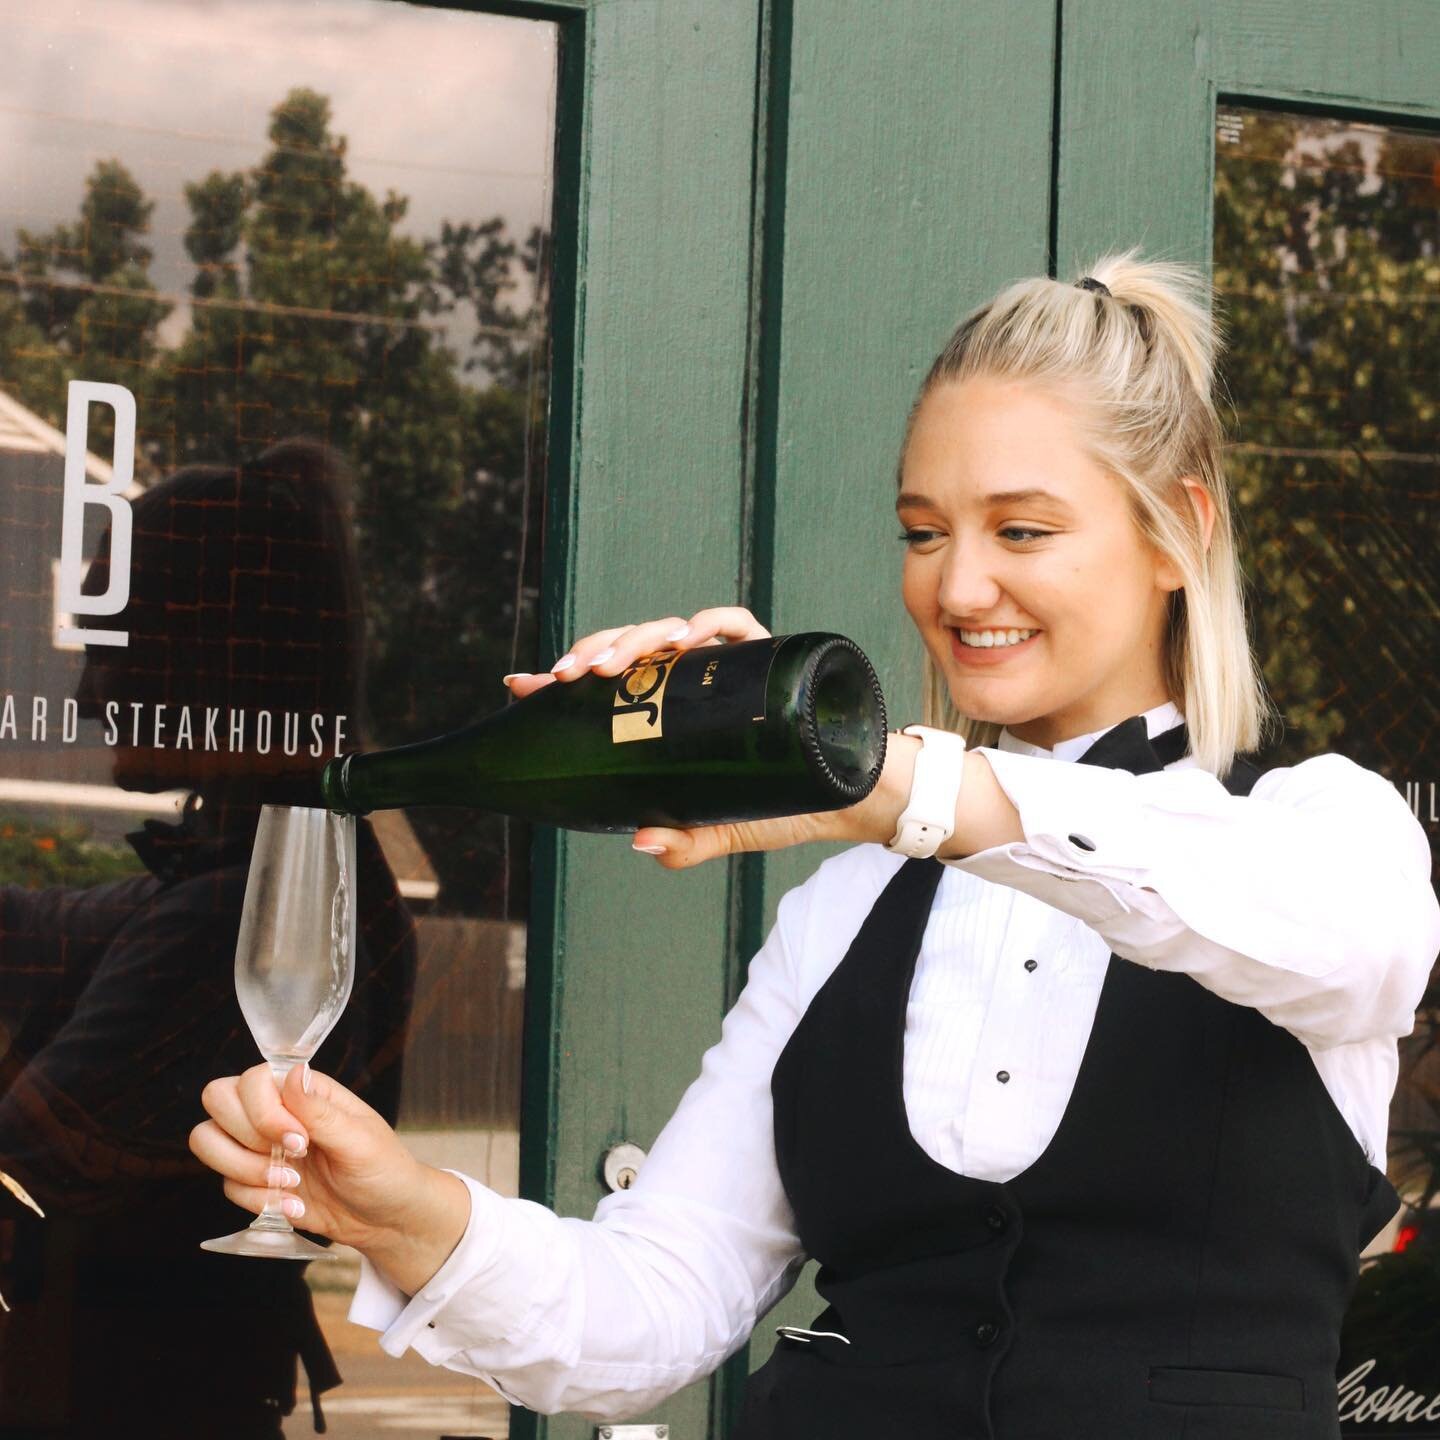 Our staff is an integral part of an excellent dining experience at Holloway Restaurant Group; especially at Boulevard Steakhouse. We&rsquo;re grateful for @_cassadieray for helping us ensure that our guest have an excellent experience at Oklahoma&rsq